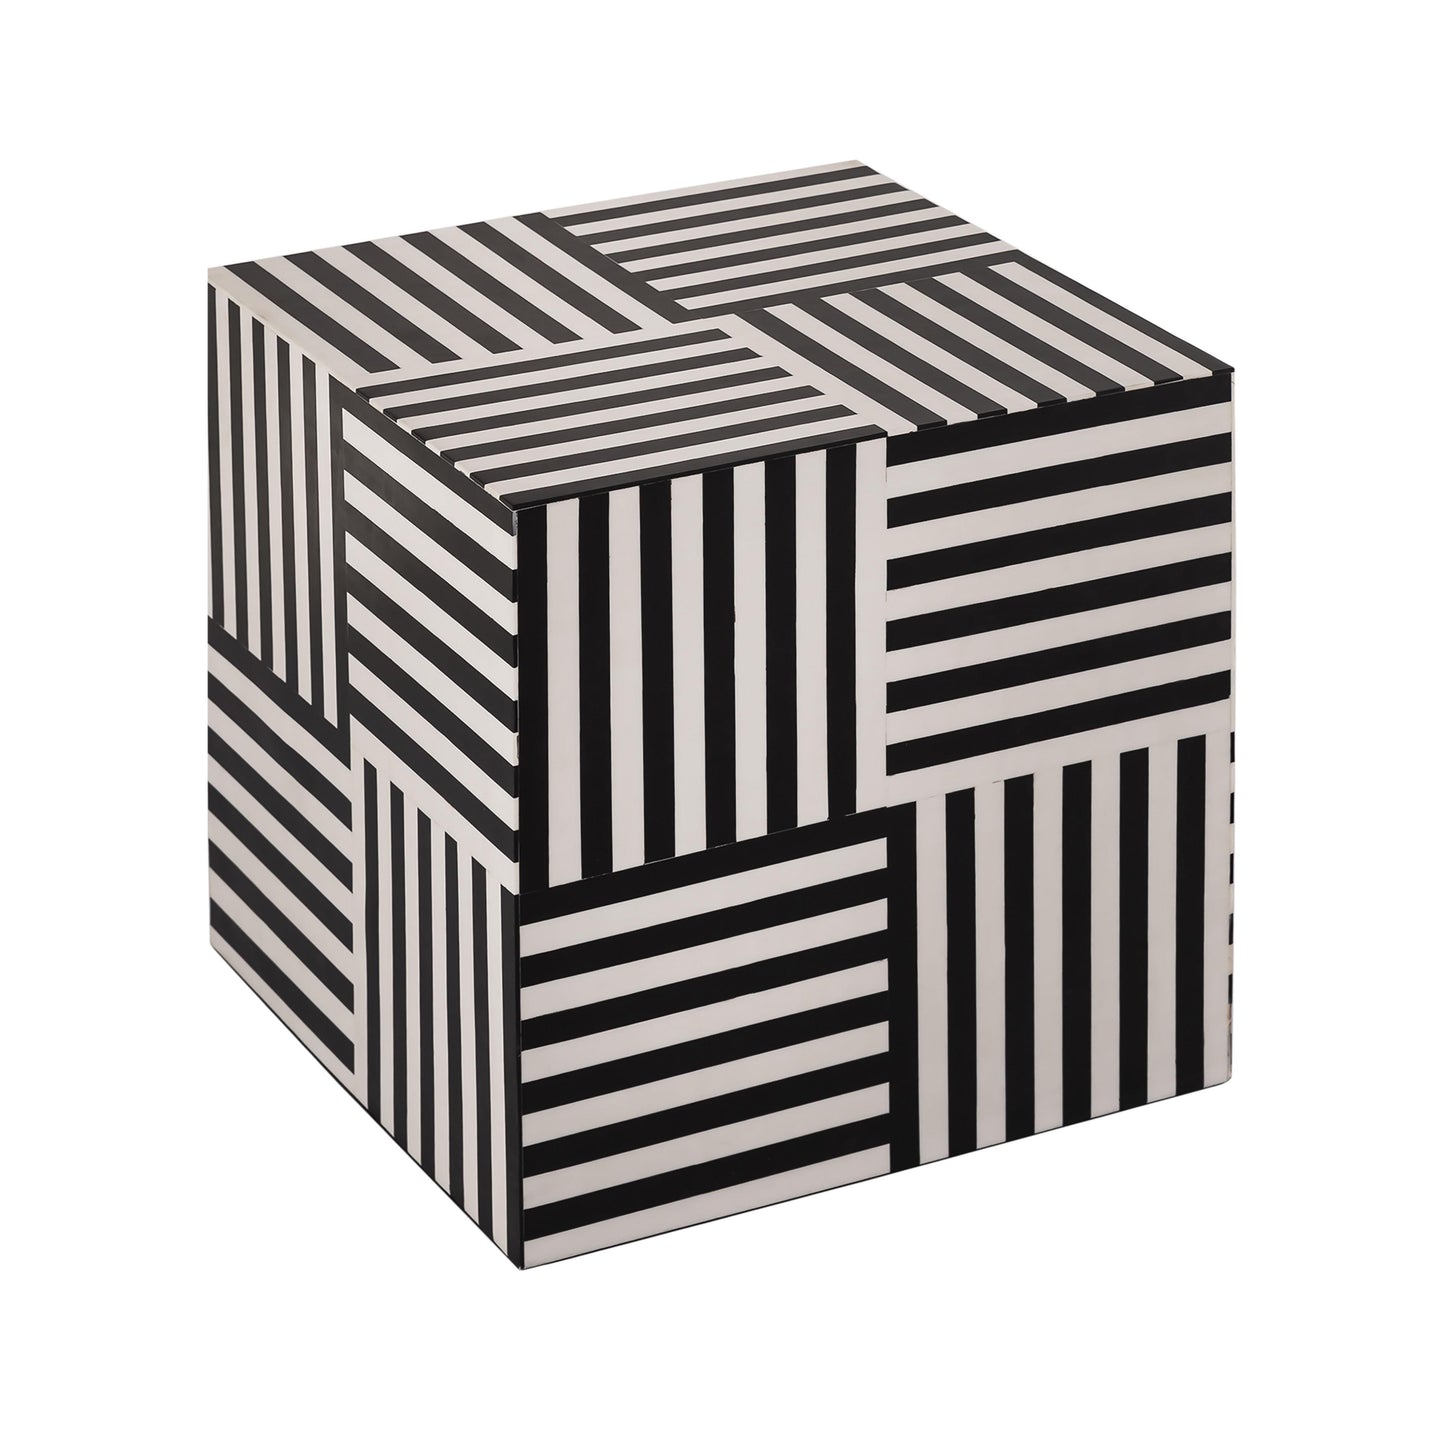 Tov Furniture Cube Side Table